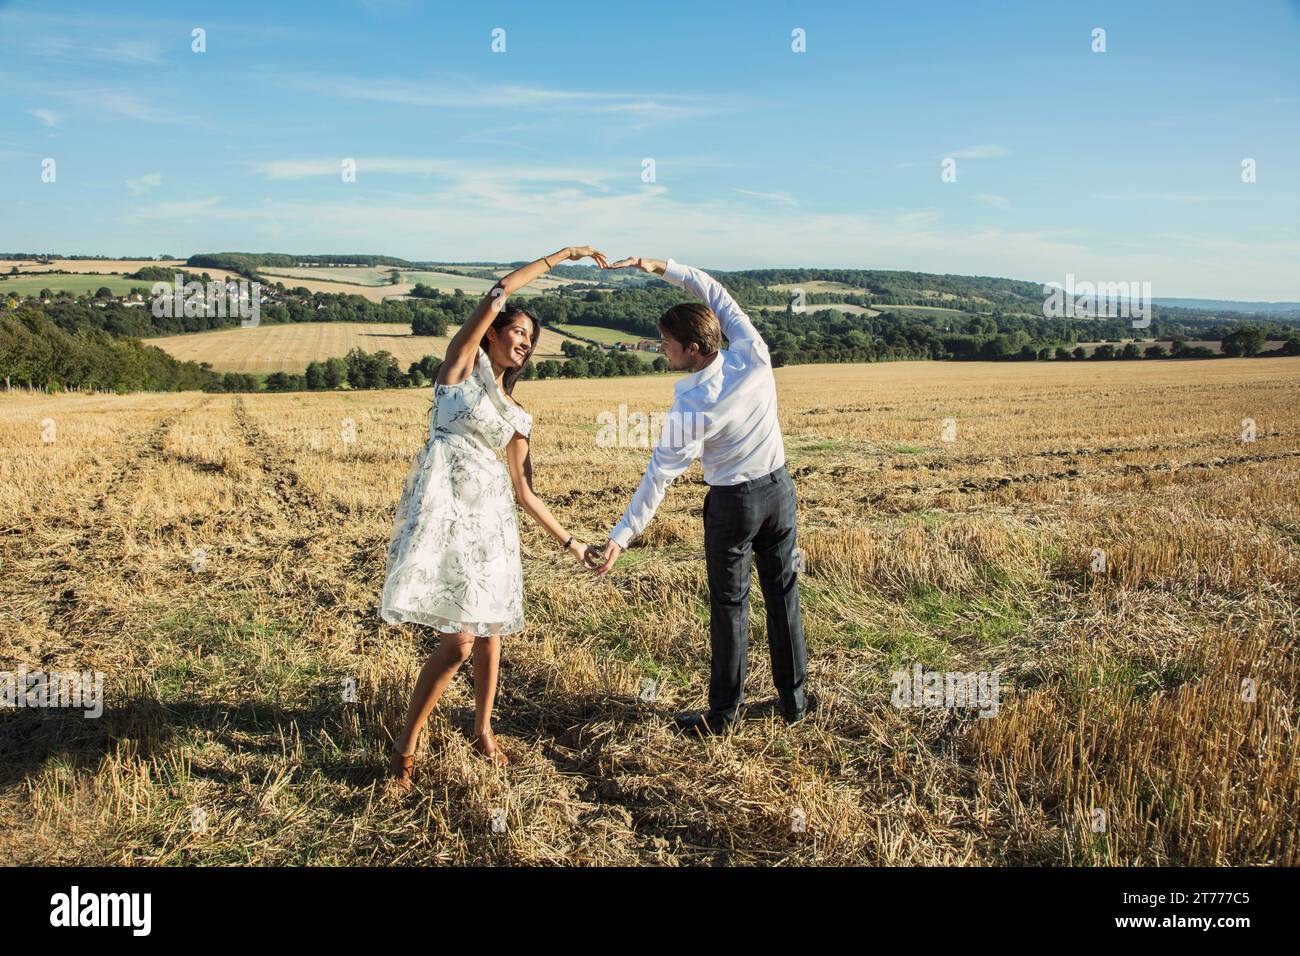 Couple in Field Holding Hands Making Heart Shape Stock Photo